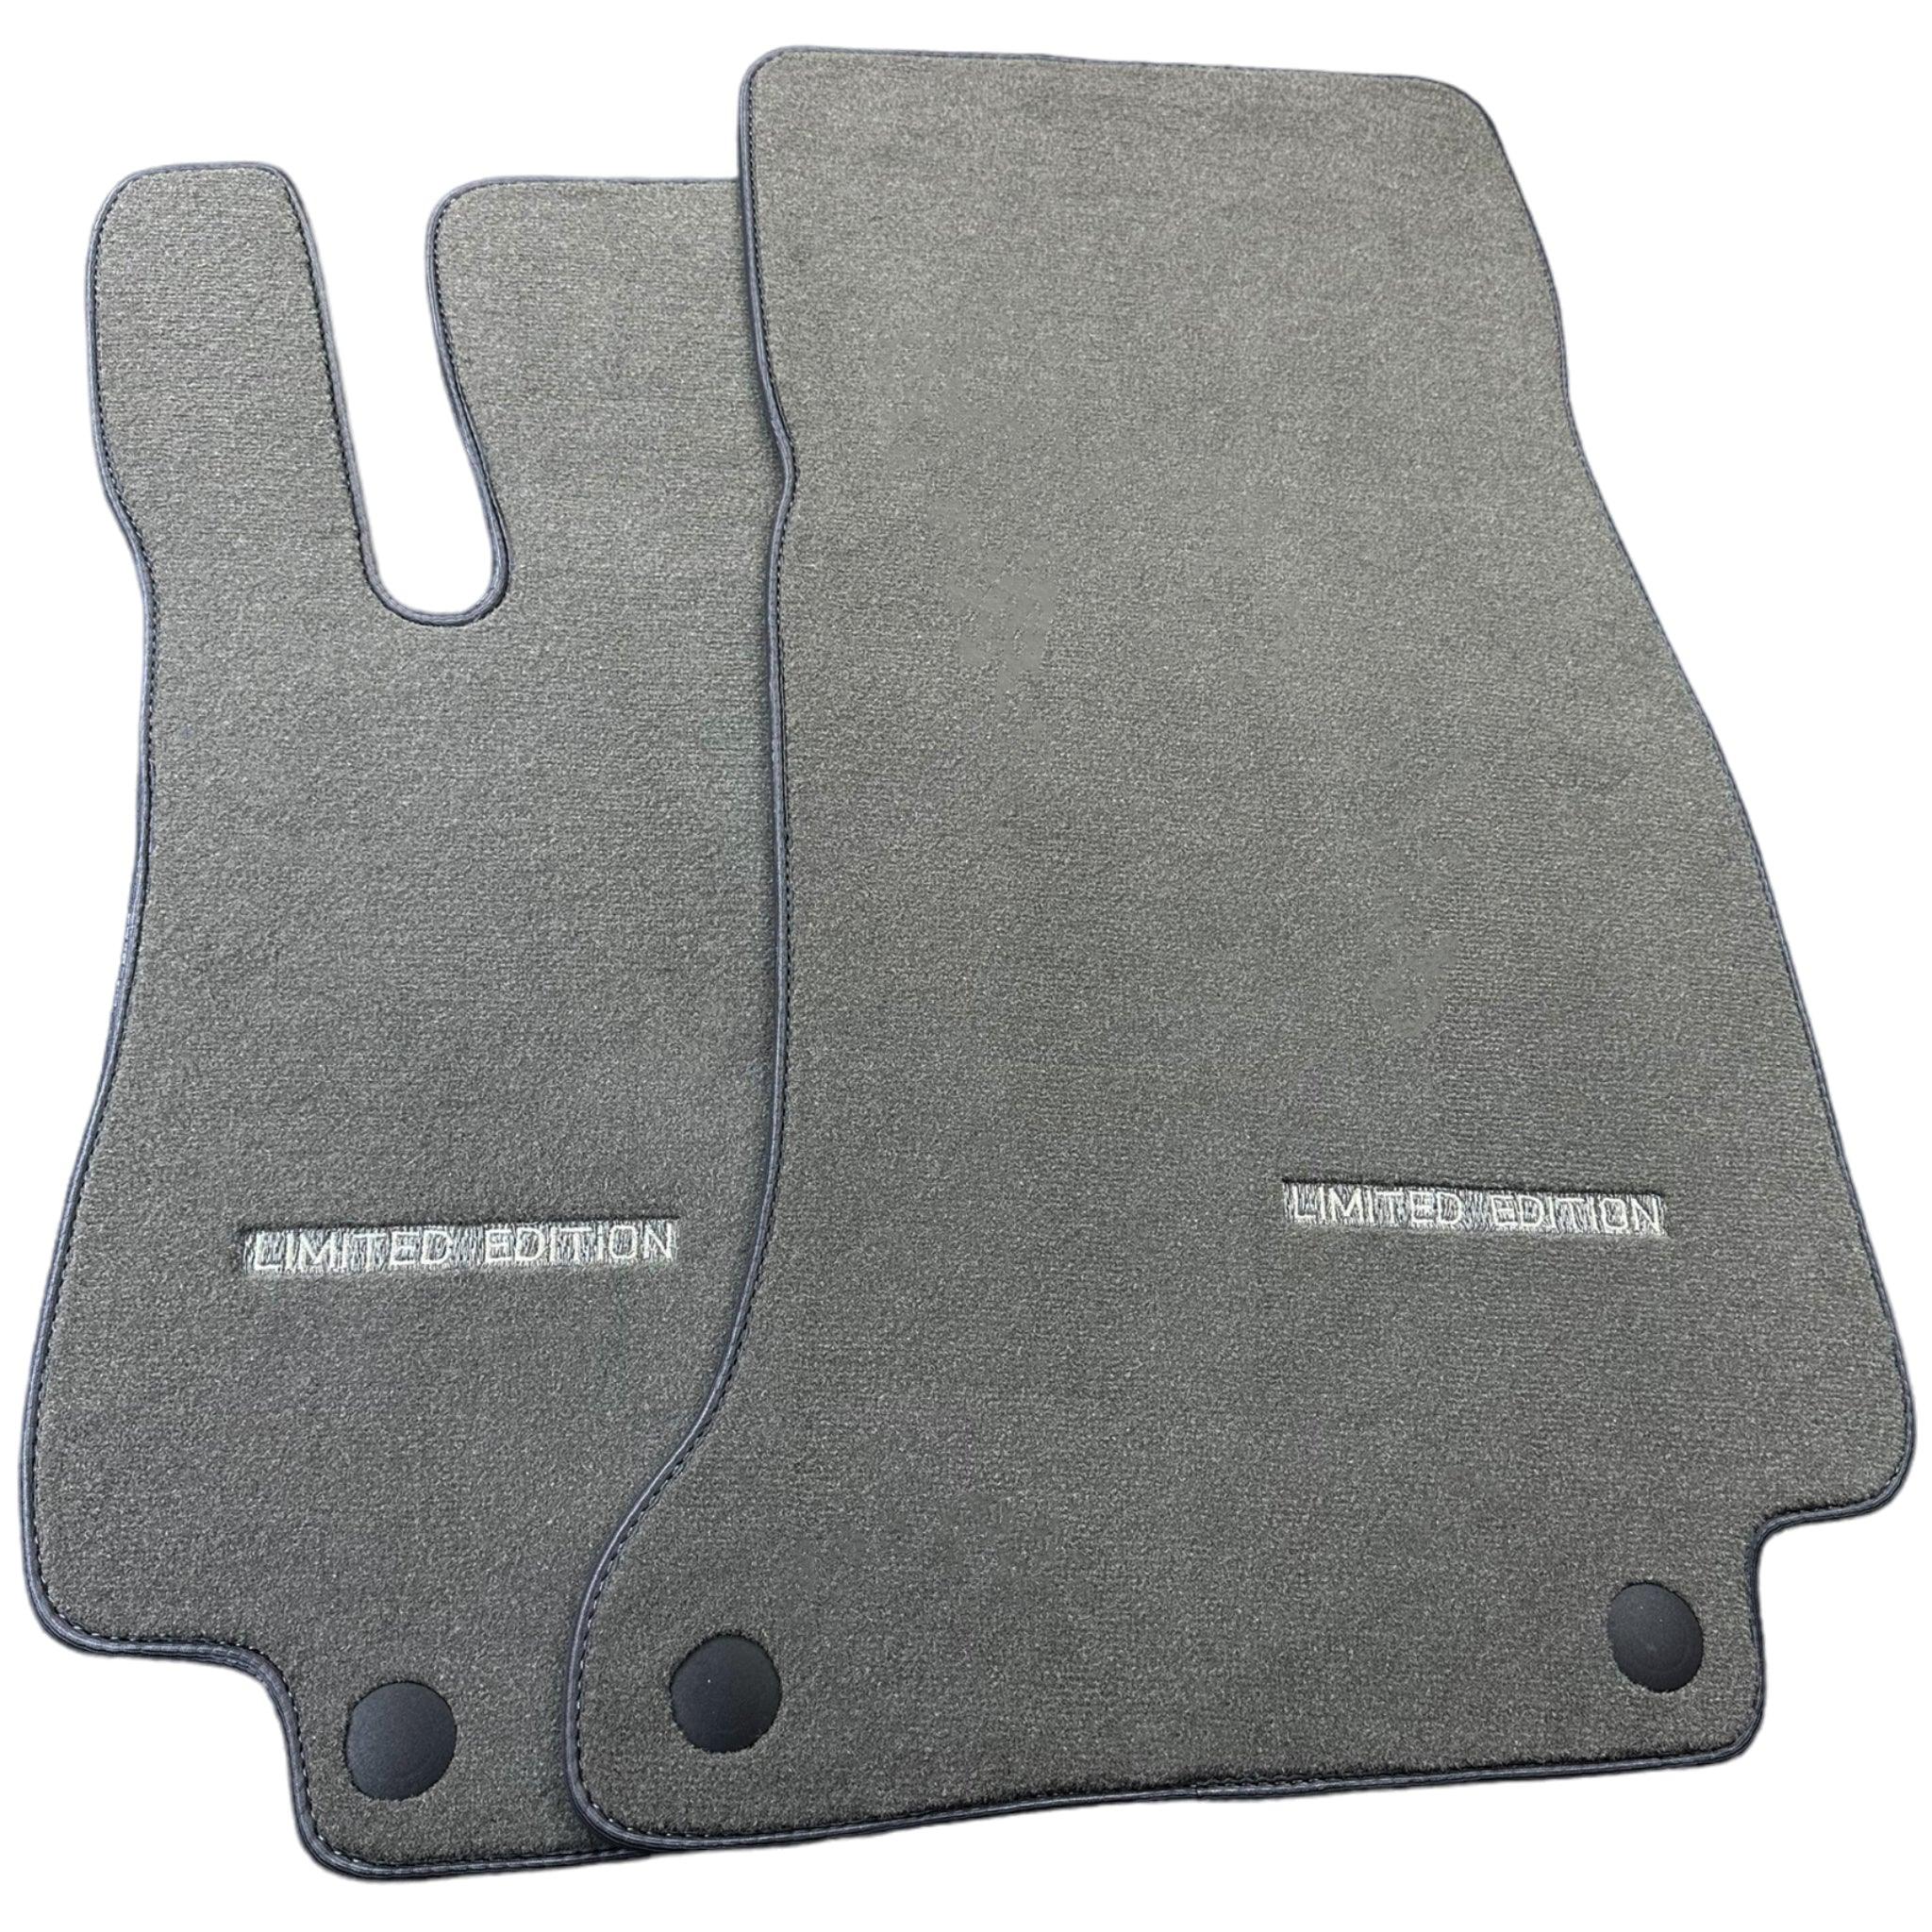 Gray Floor Mats For Mercedes Benz S-Class Z223 Maybach (2021-2023) | Limited Edition